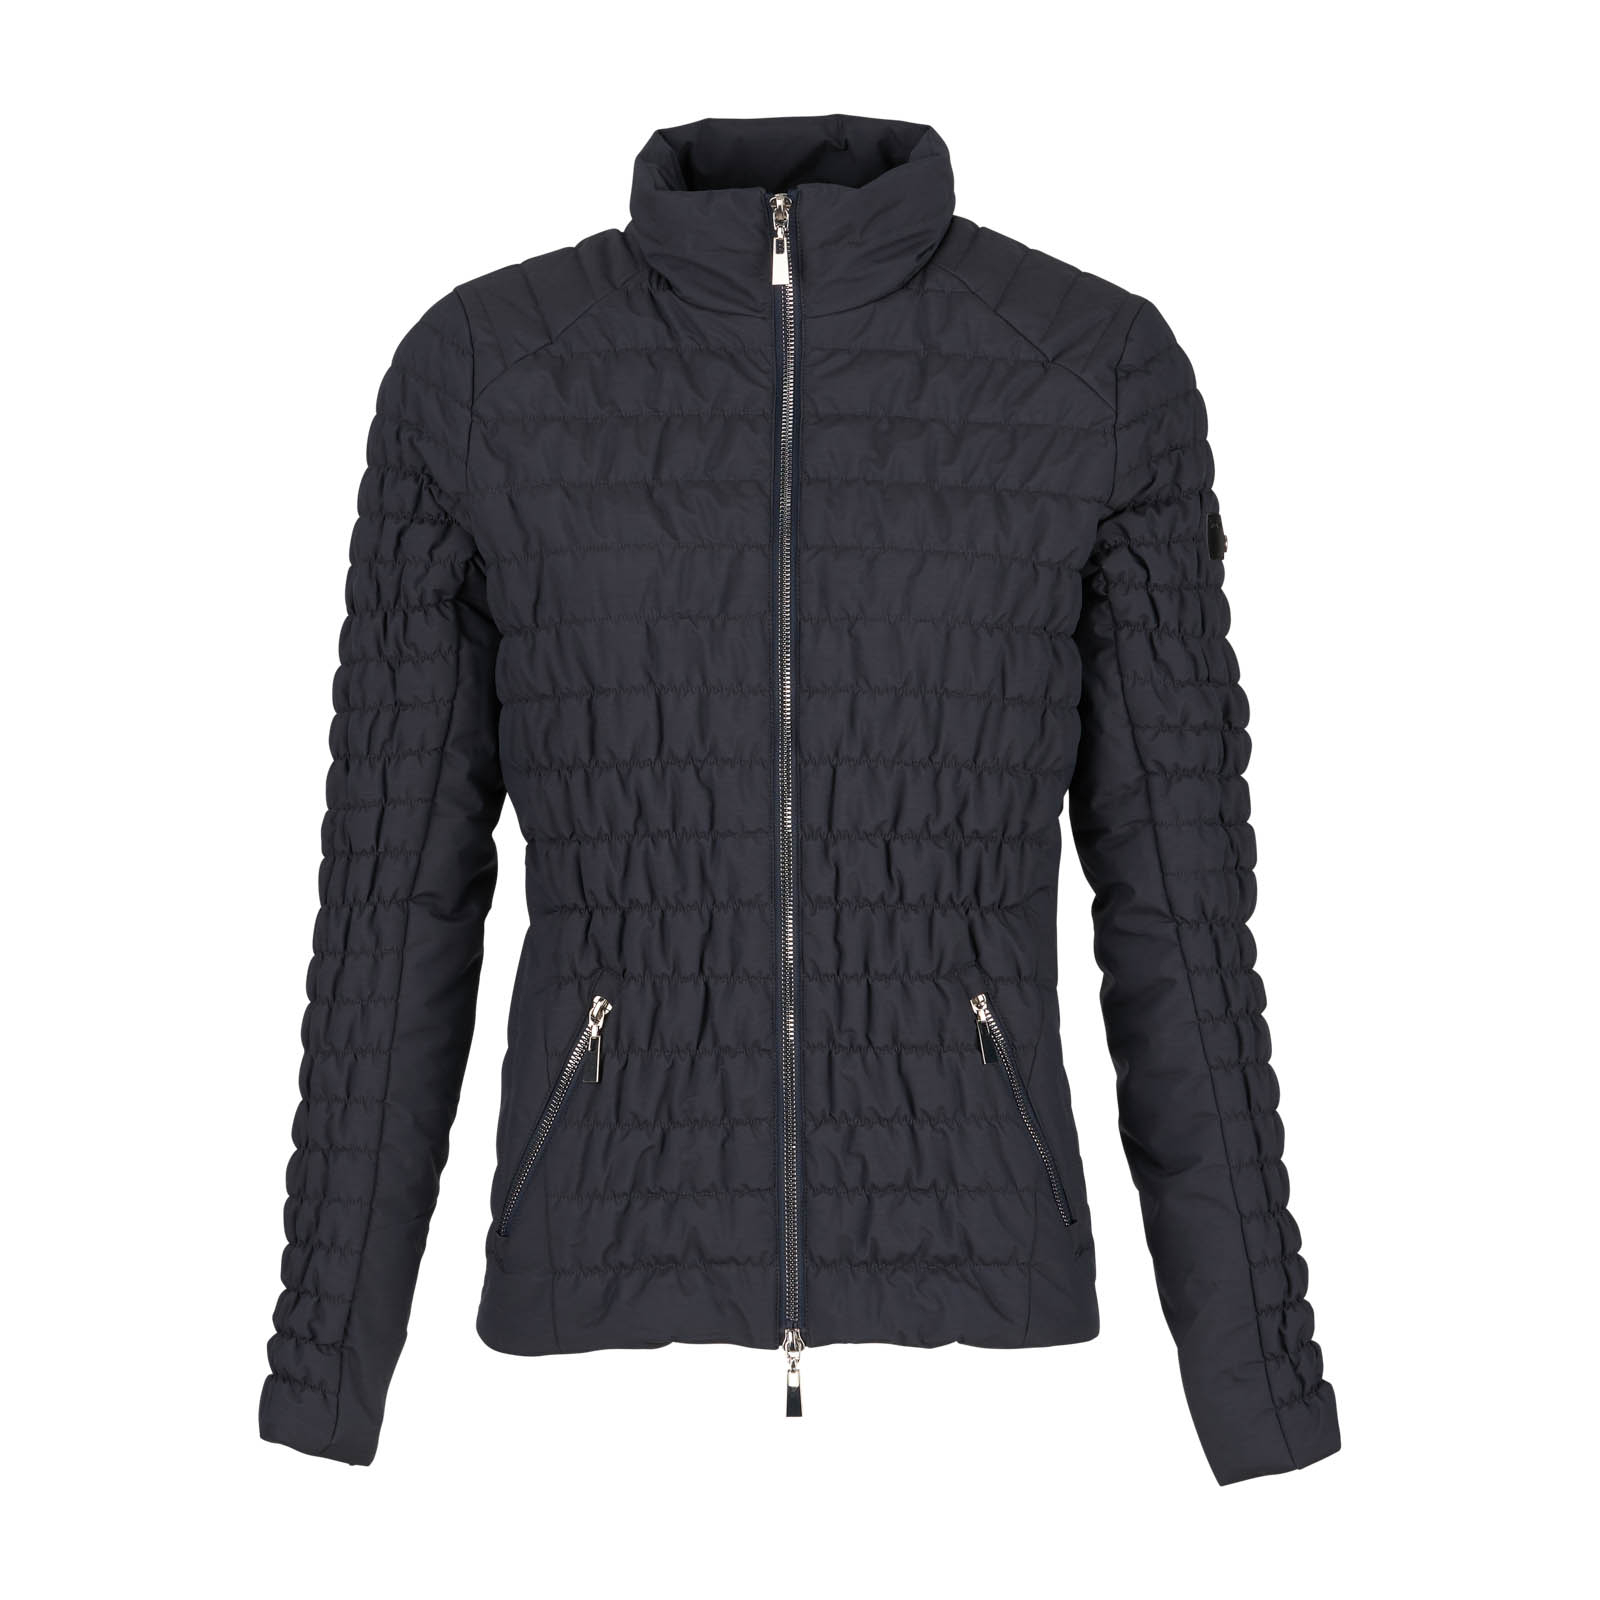 Buy Horze Luna Women's Quilted Stretch Riding Jacket